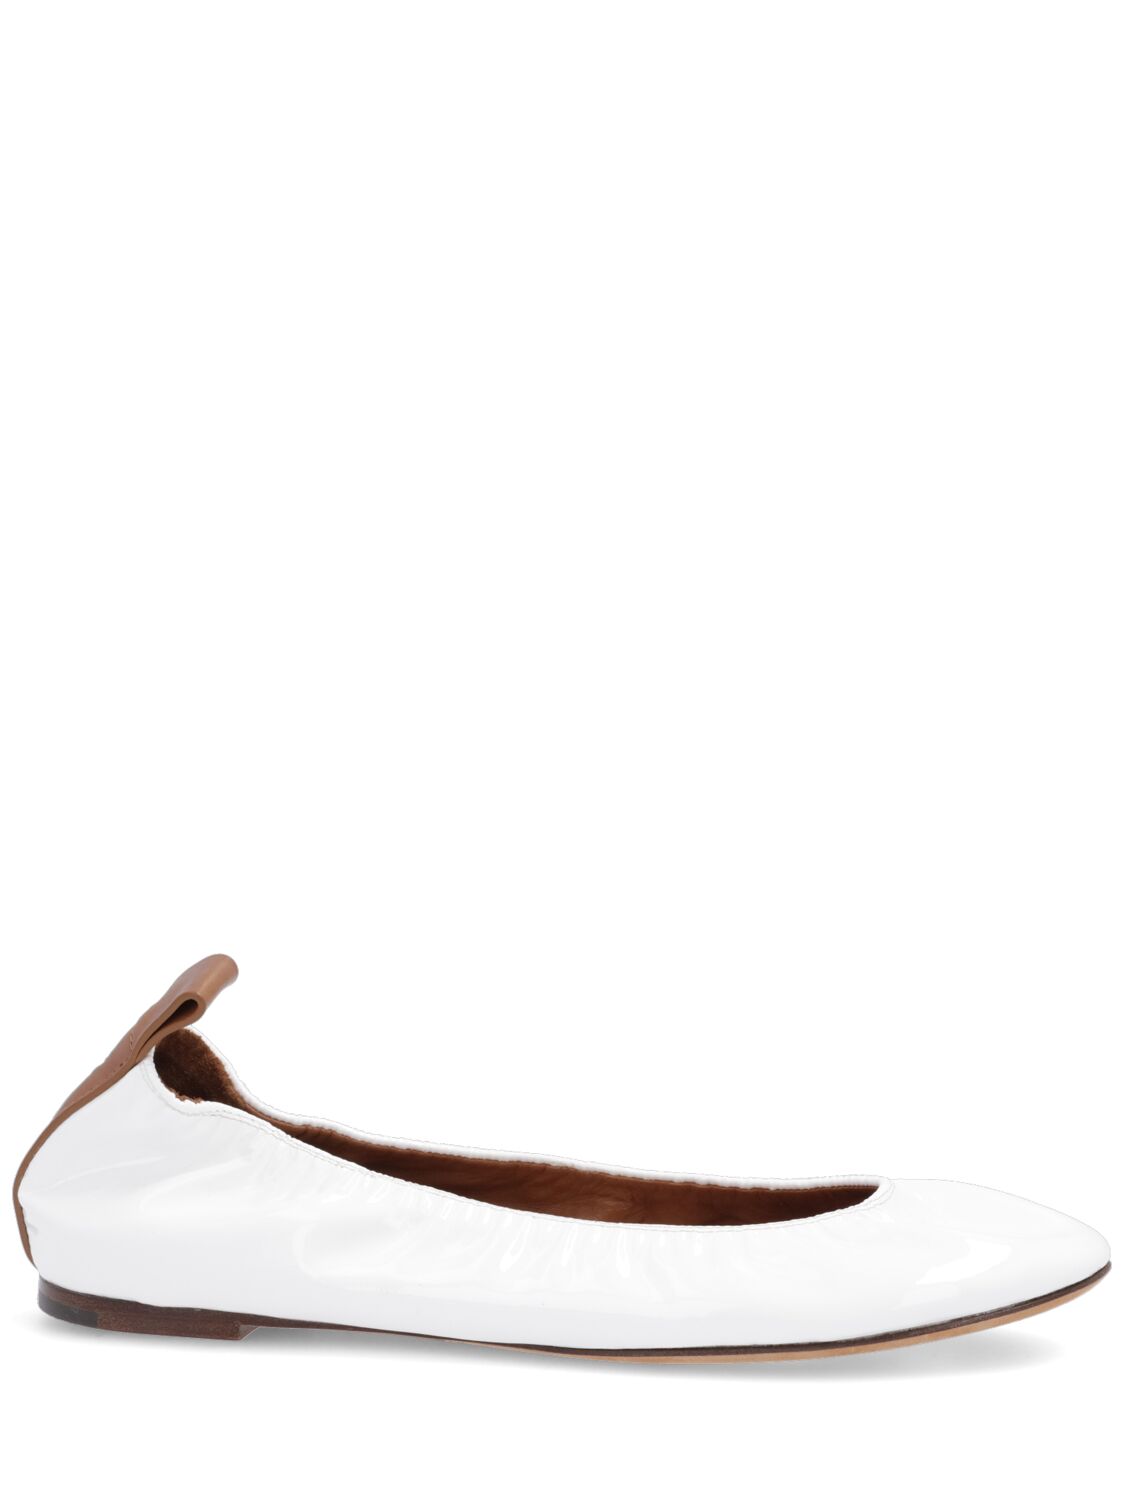 Lanvin 5mm Patent Leather Ballerinas In White